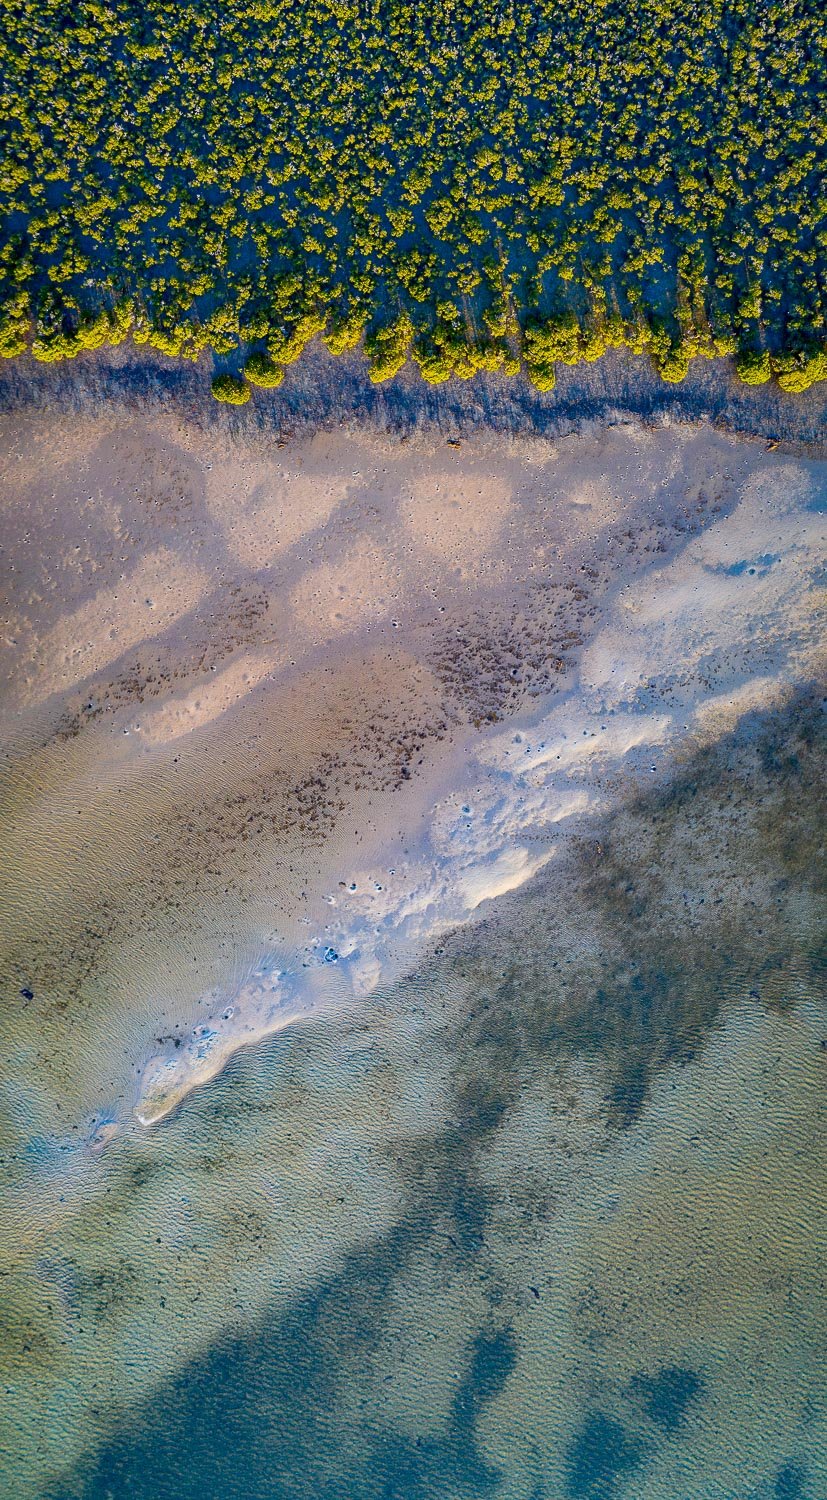 A large texture of sand with countless small trees on the top, French Island Aerial #10 - Western Port Bay